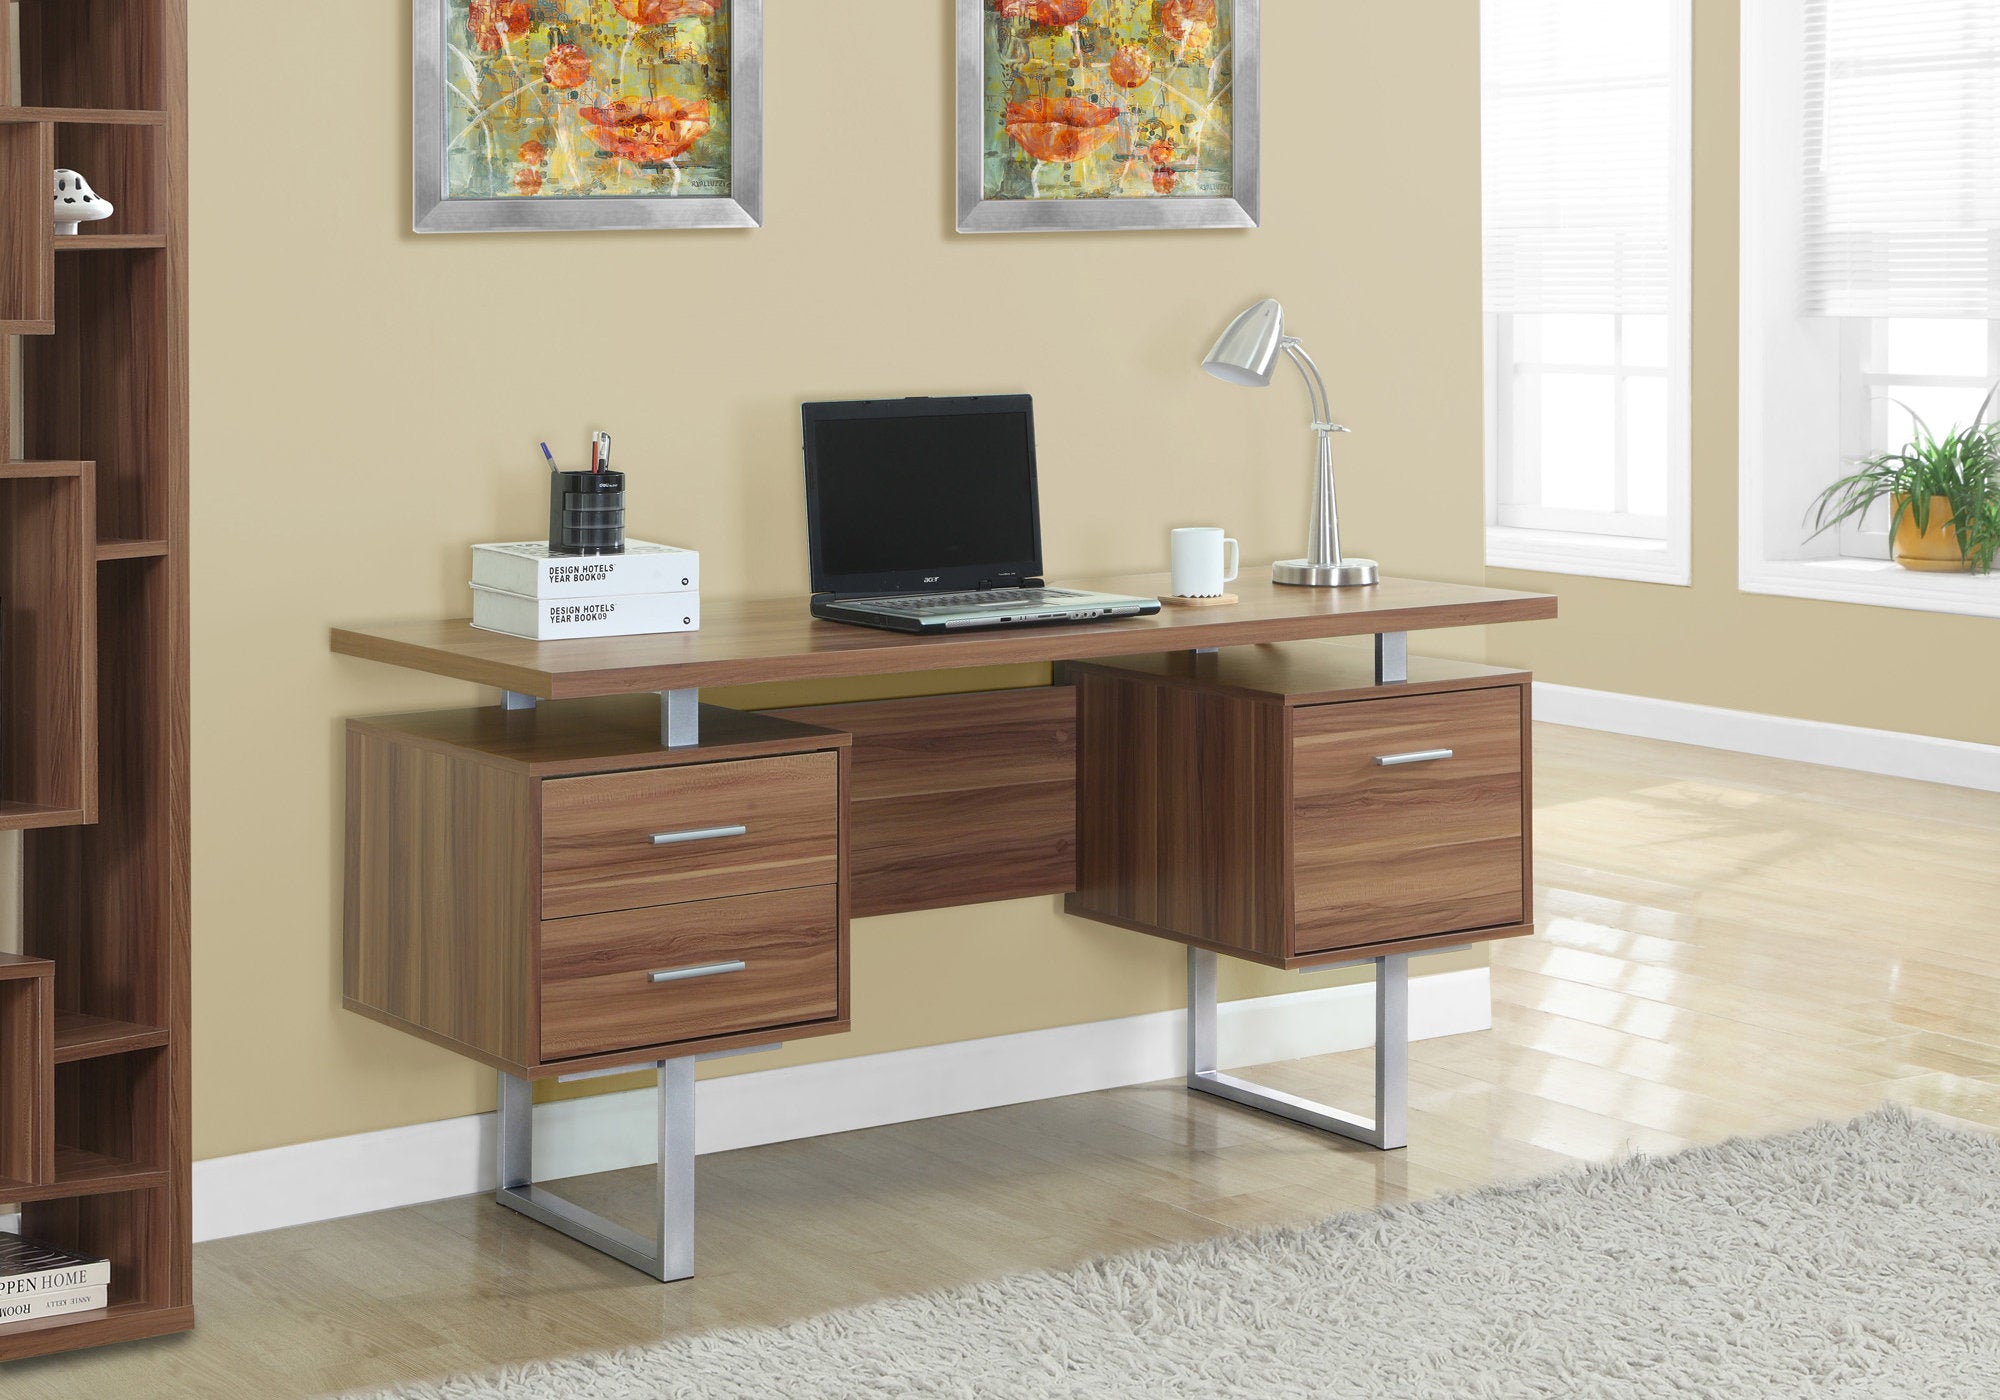 MN-967083    Computer Desk, Home Office, Laptop, Left, Right Set-Up, Storage Drawers, 60"L, Metal, Laminate, Walnut, Silver, Contemporary, Modern